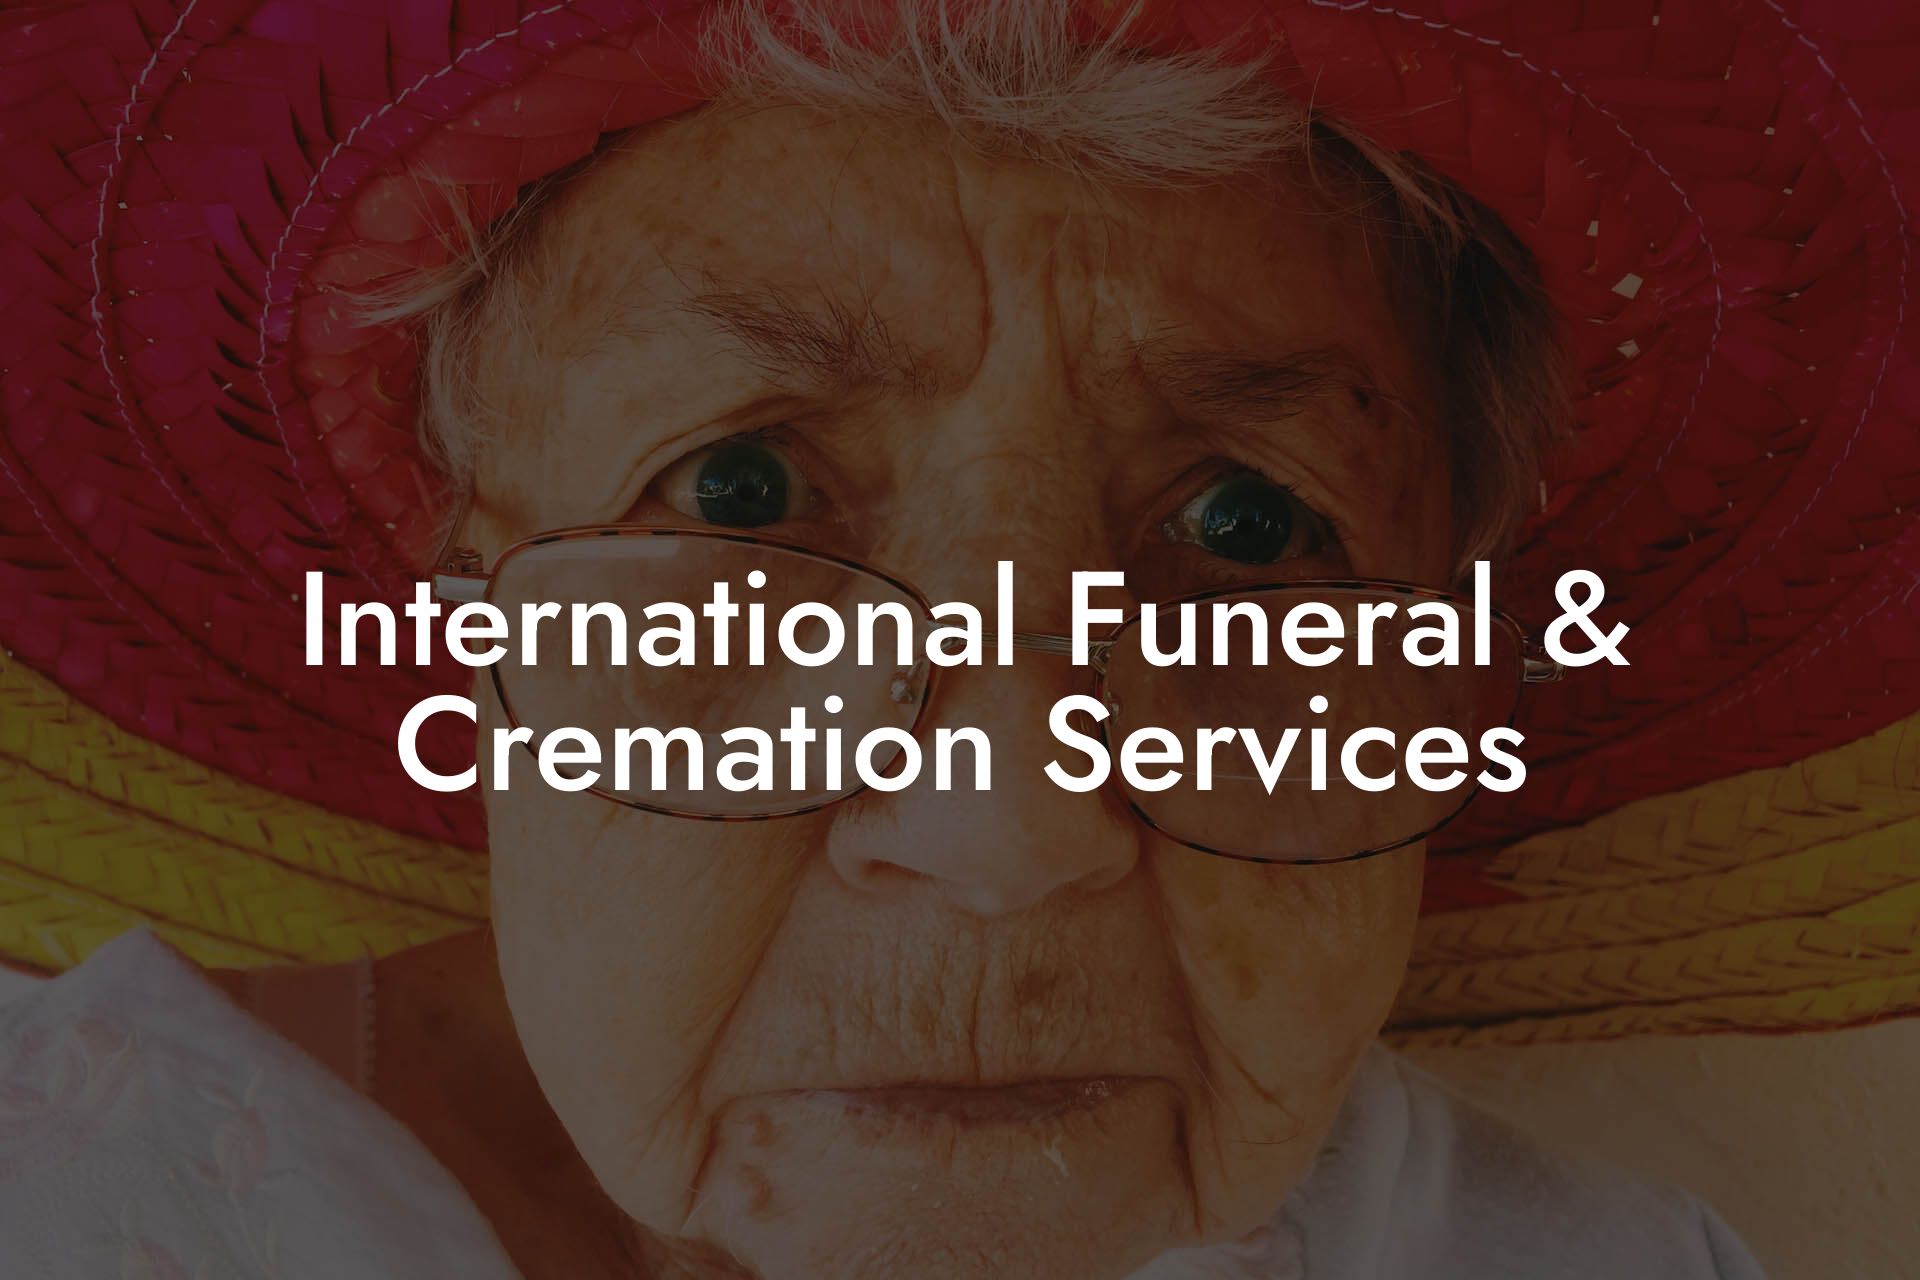 International Funeral & Cremation Services